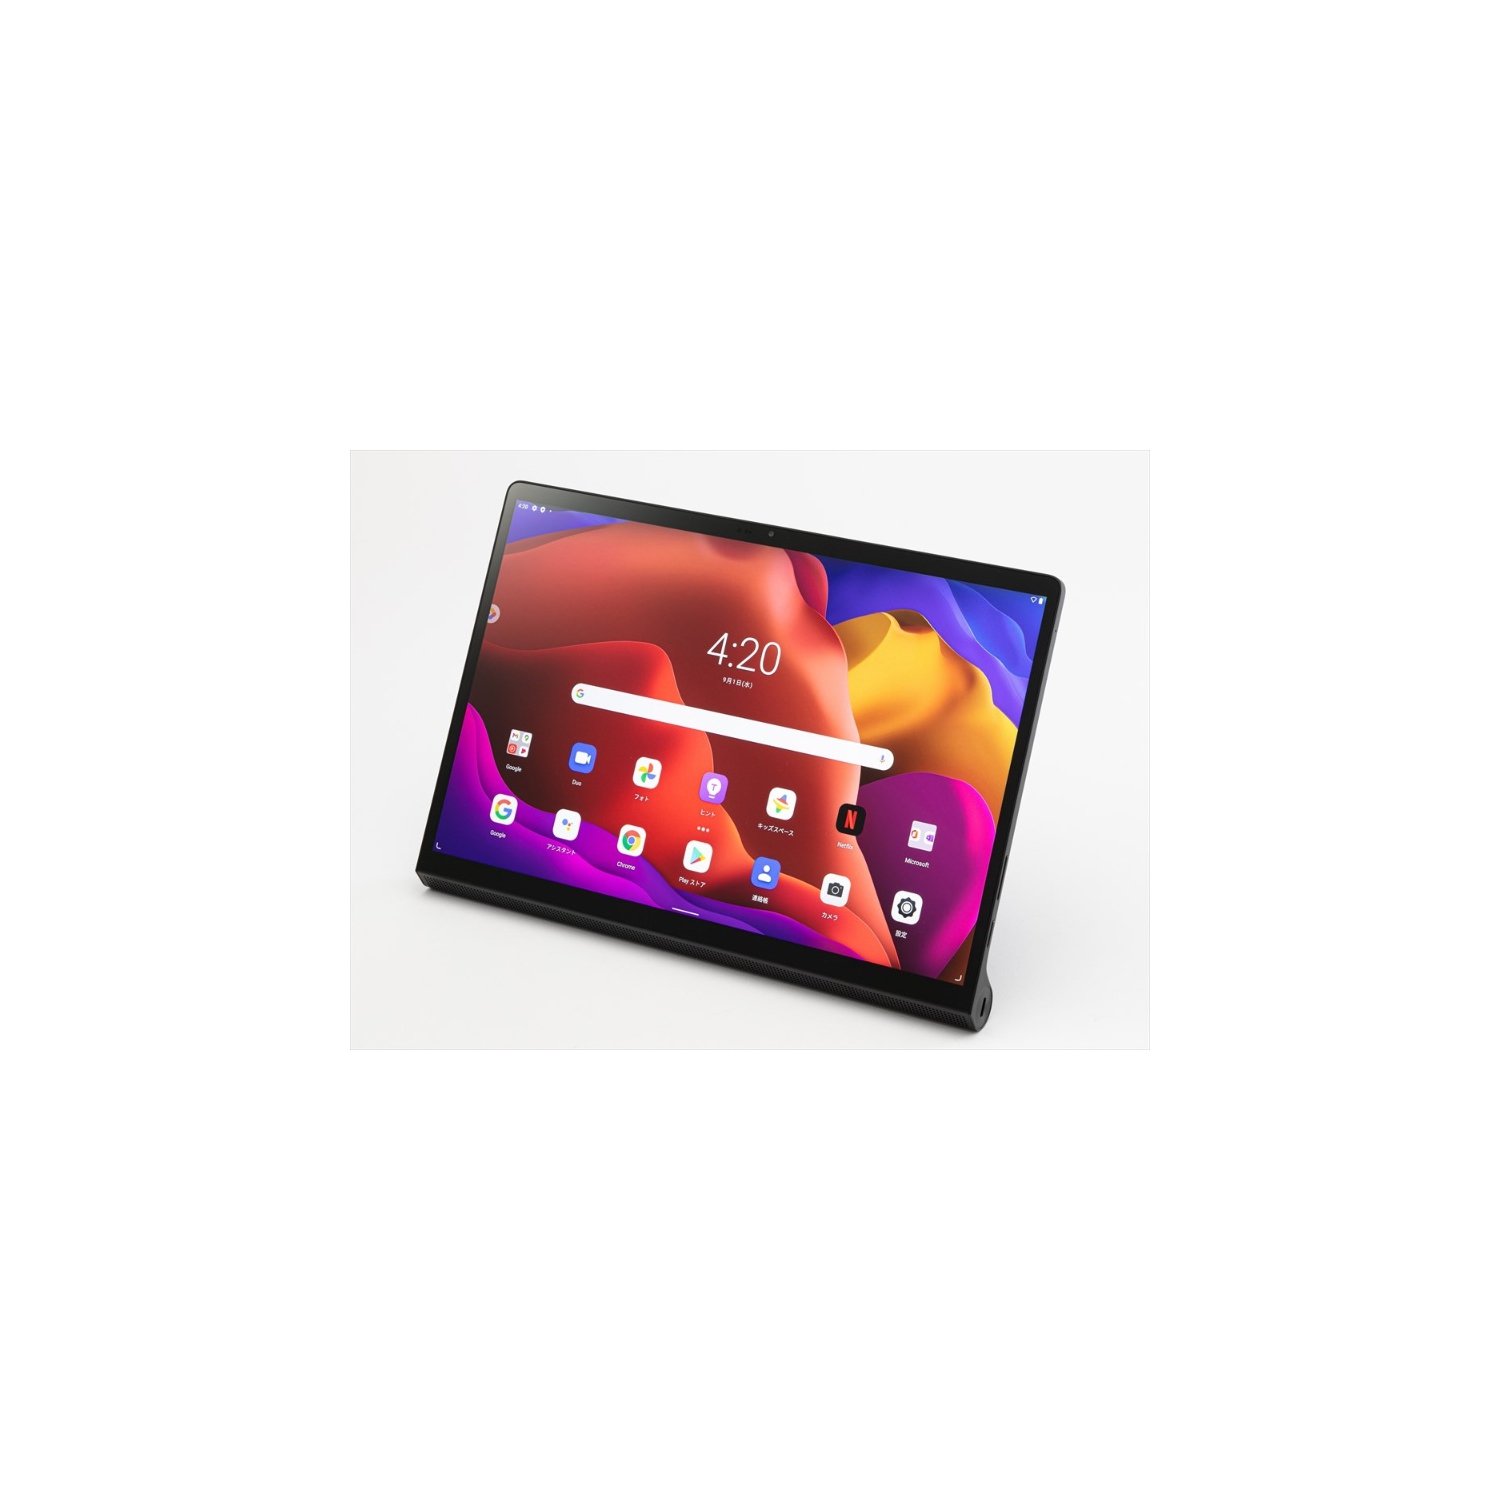 NEW - Lenovo Yoga Tab 13 Tablet, 13.0" 2K Touch Screen Display, Qualcomm Snapdragon 870 Processor, 8GB LPDDR5 (Soldered), Stroage 128GB, Android 11